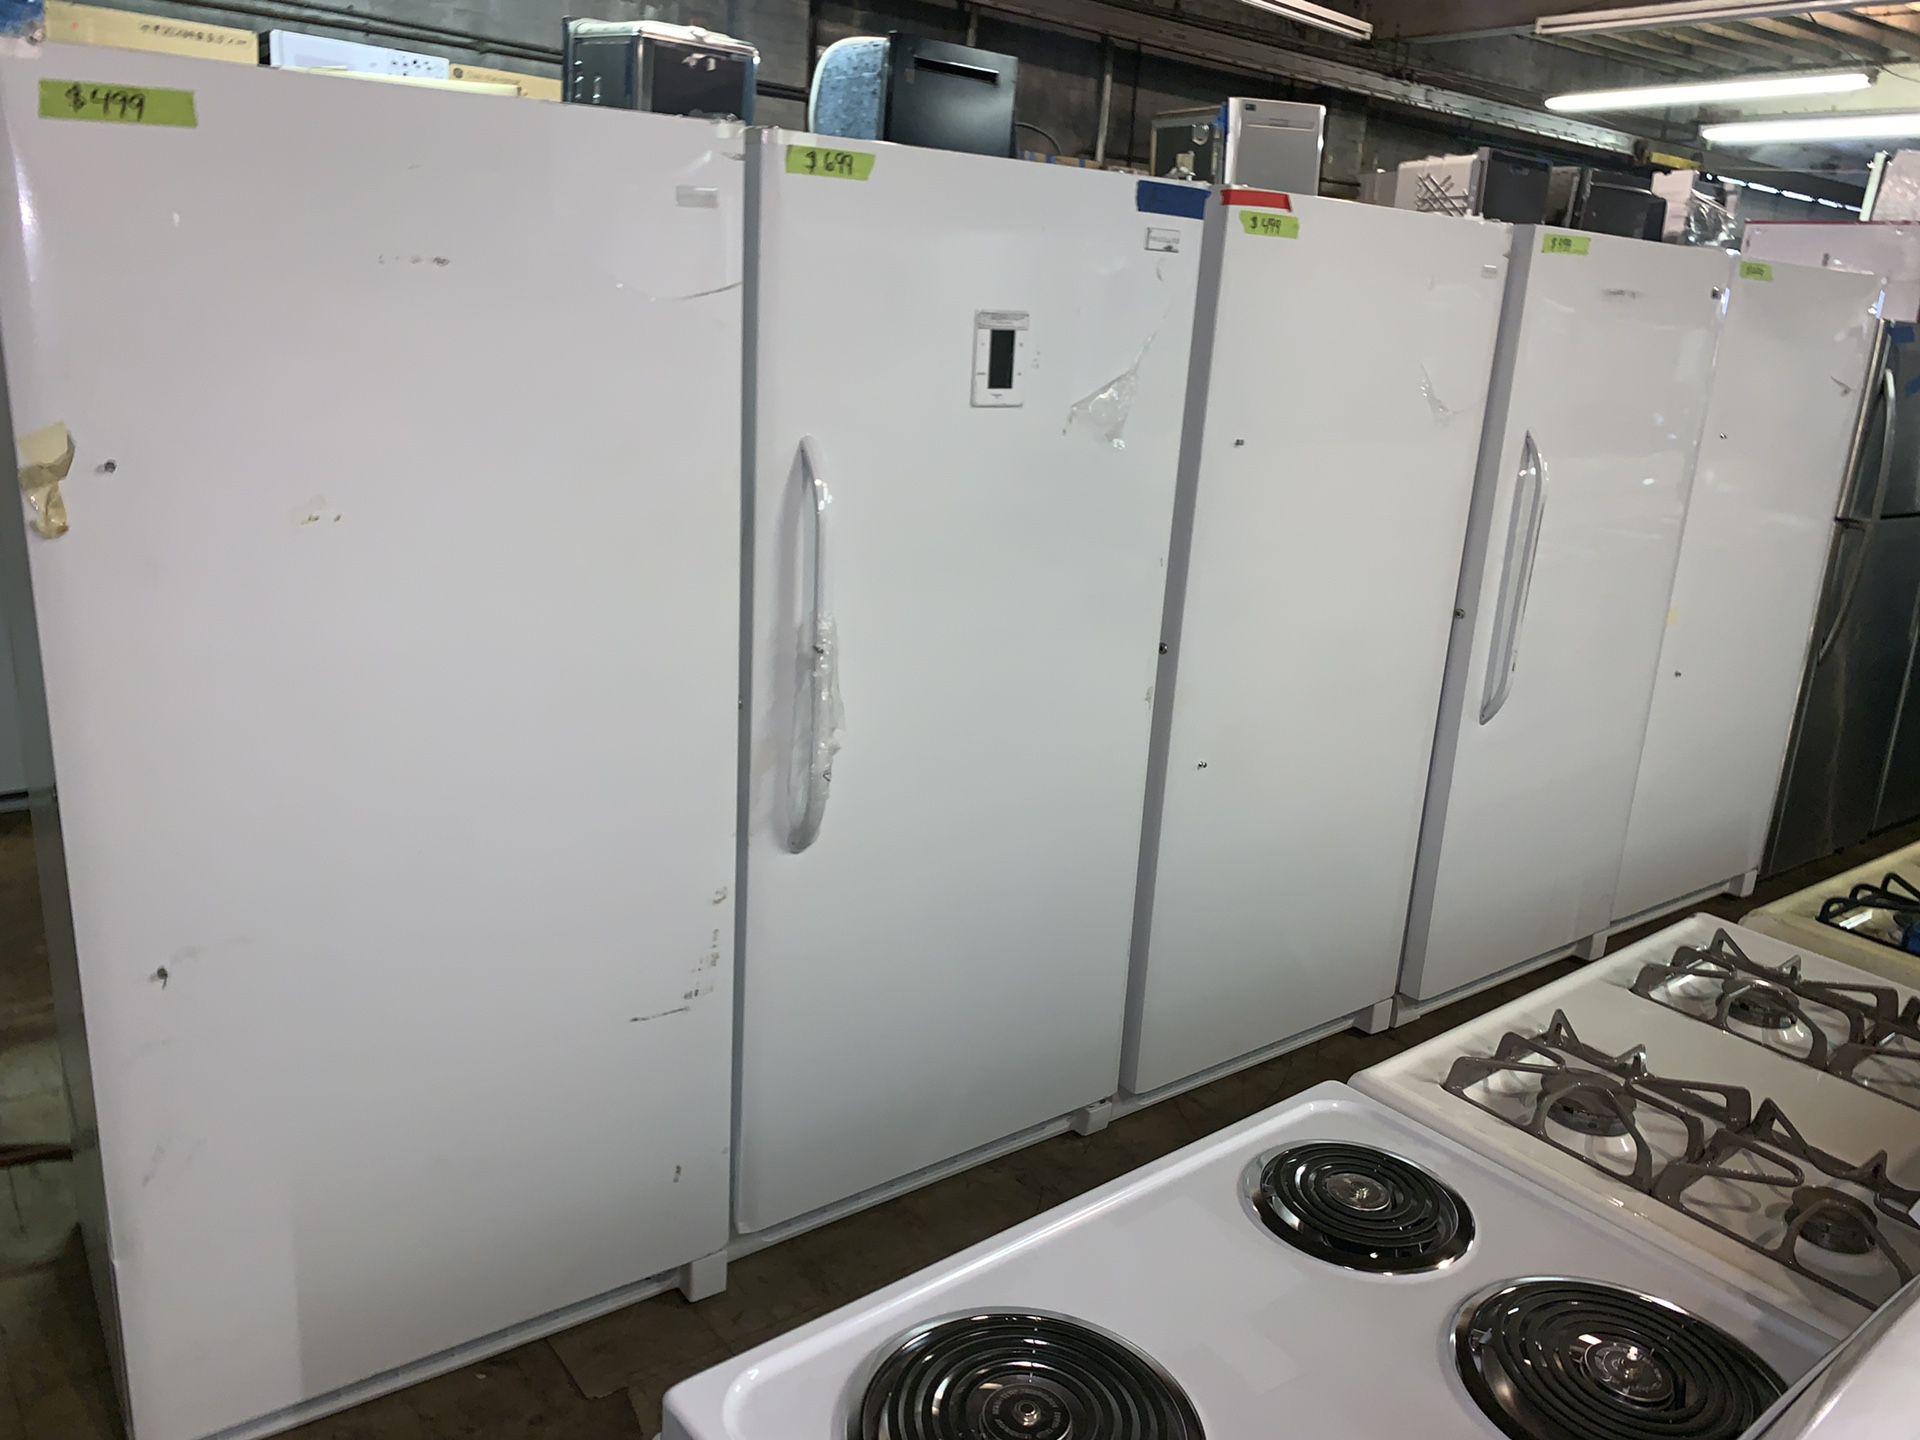 New scratch & dent Upright freezers in excellent conditions with 4 months warranty - $450 & up❗️